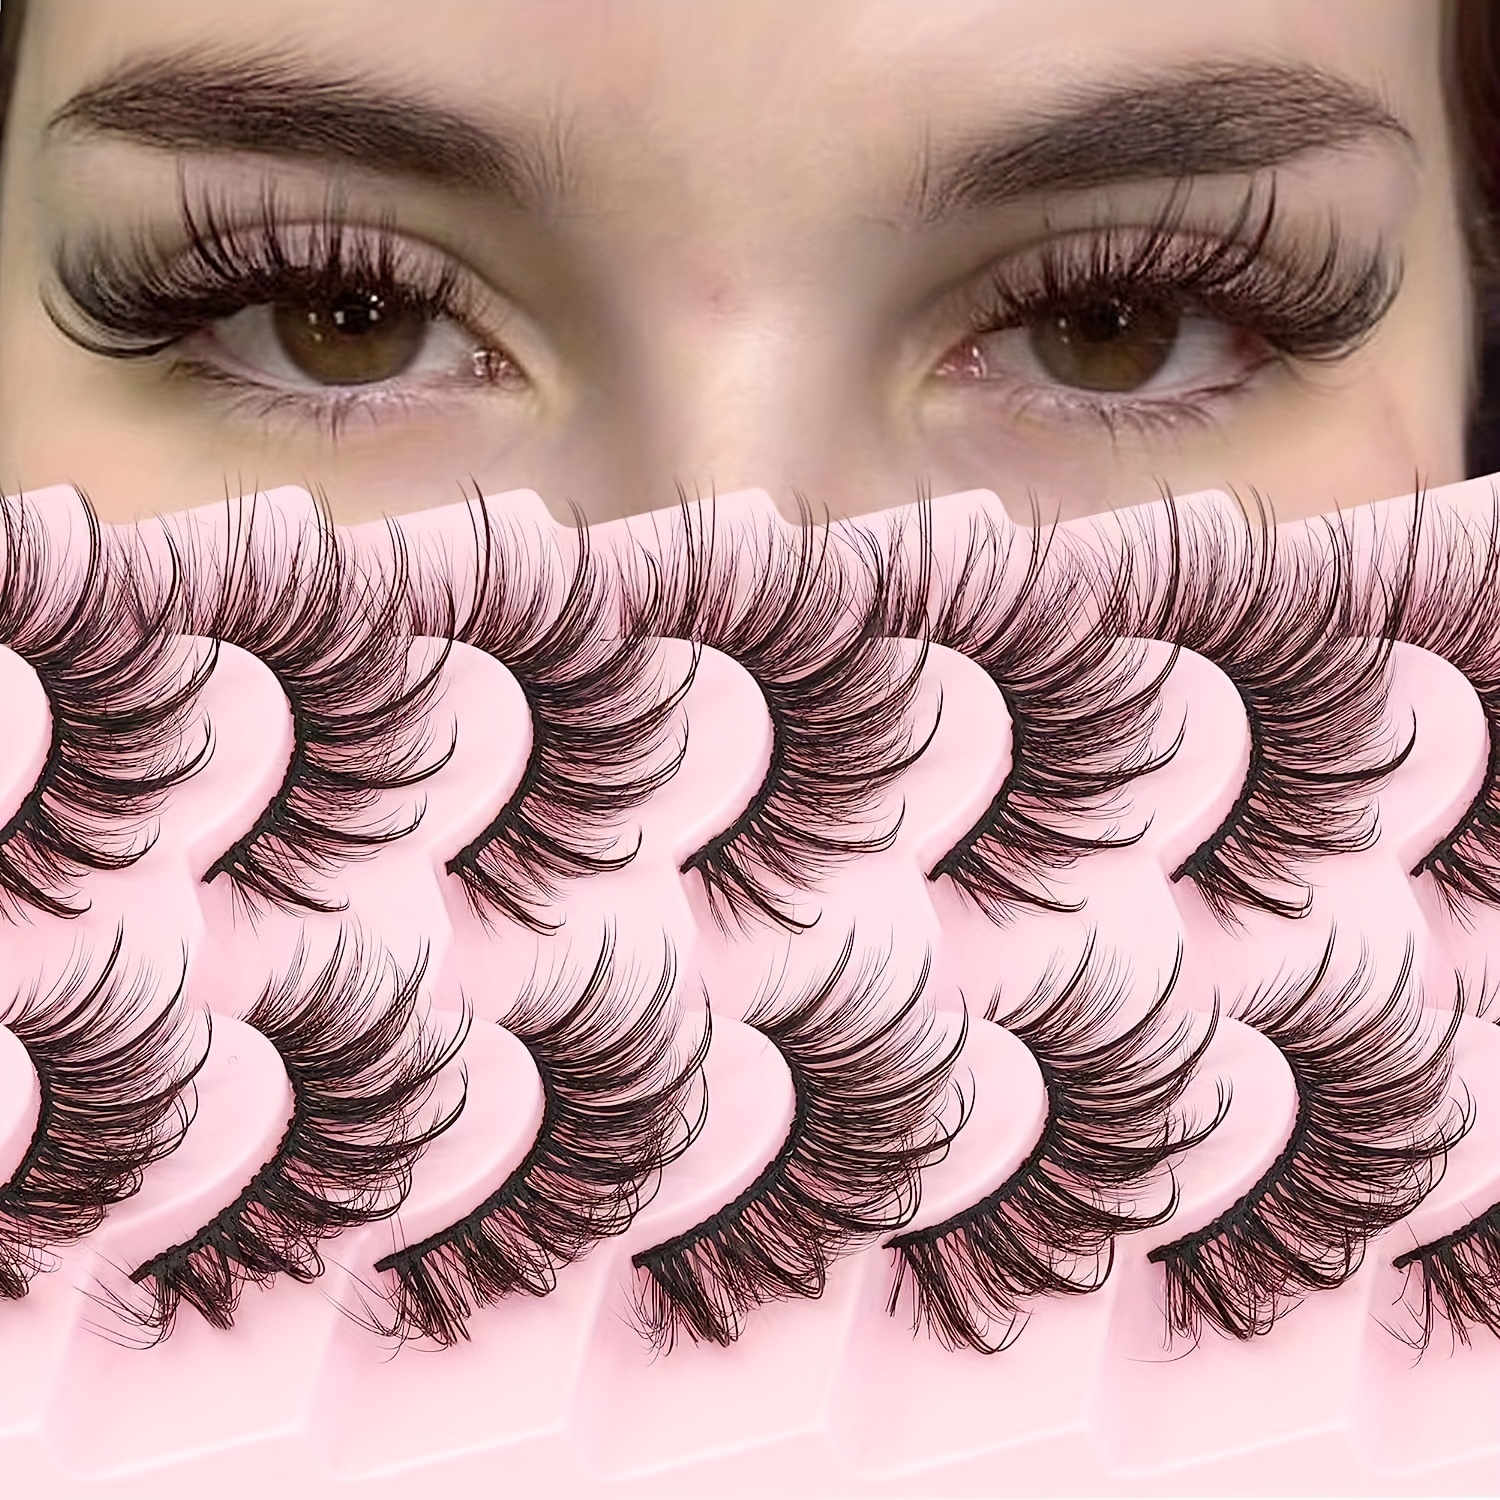 

Faux Mink Lashes Fluffy False Eyelashes Natural Look Wispy 3d Faux Mink Lashes Cat Eye Flat Lashes Natural Fake Lashes Extensions Strip Eyelashes Pack 7 Pairs